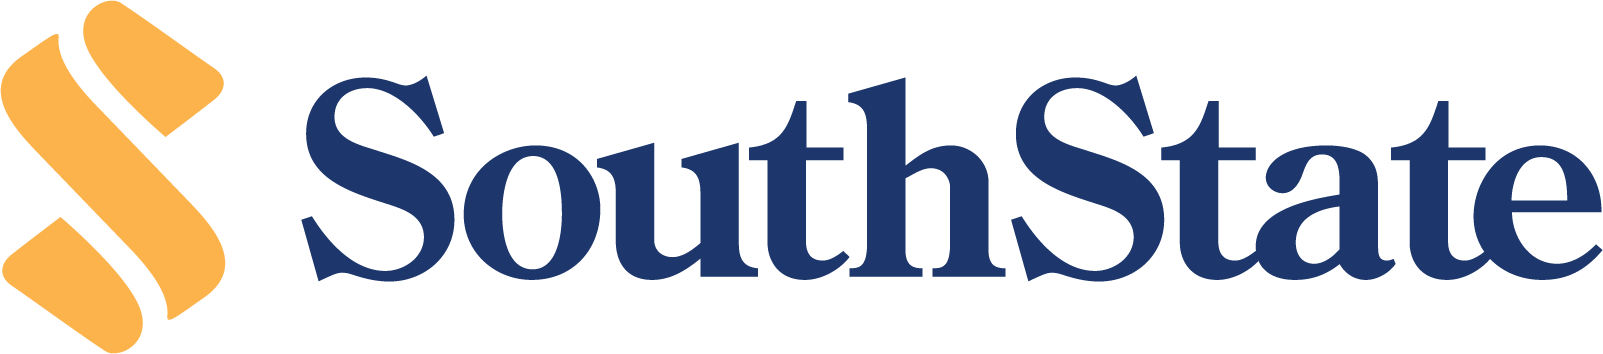 SouthState Banking Logo - Click to visit official website